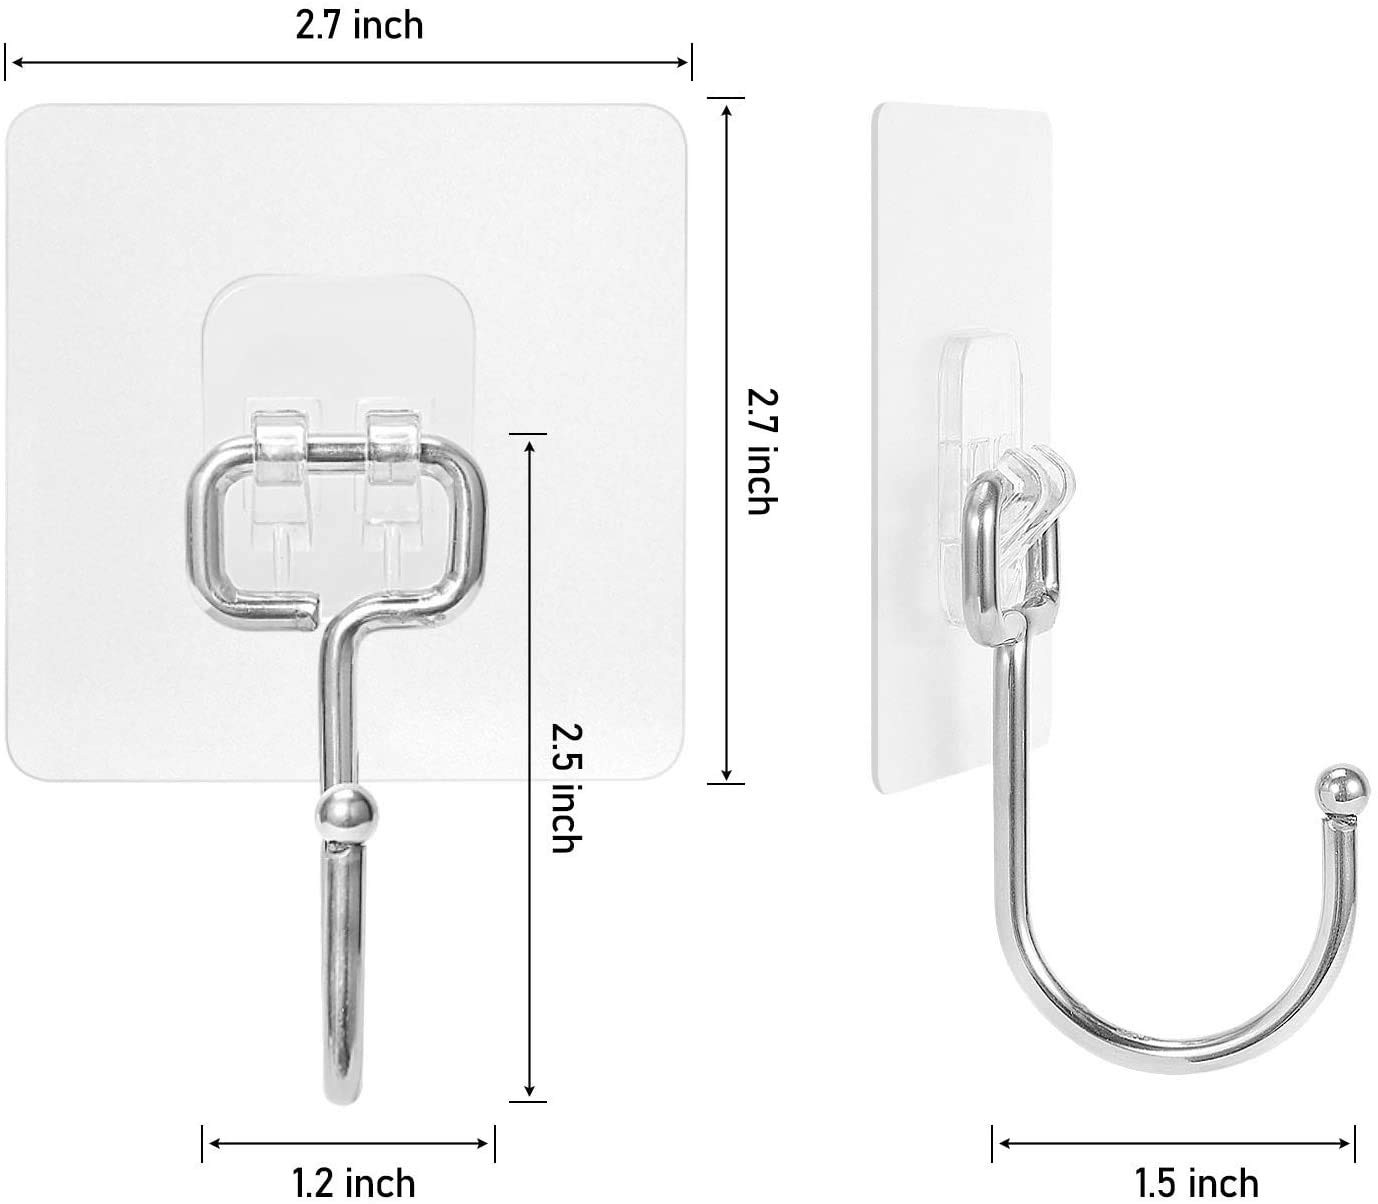 Jialto Large Adhesive Hooks 22Ib(Max), Waterproof and Rustproof Wall Hooks for Hanging Heavy Duty, Stainless Steel Towel and Coats Hooks to use